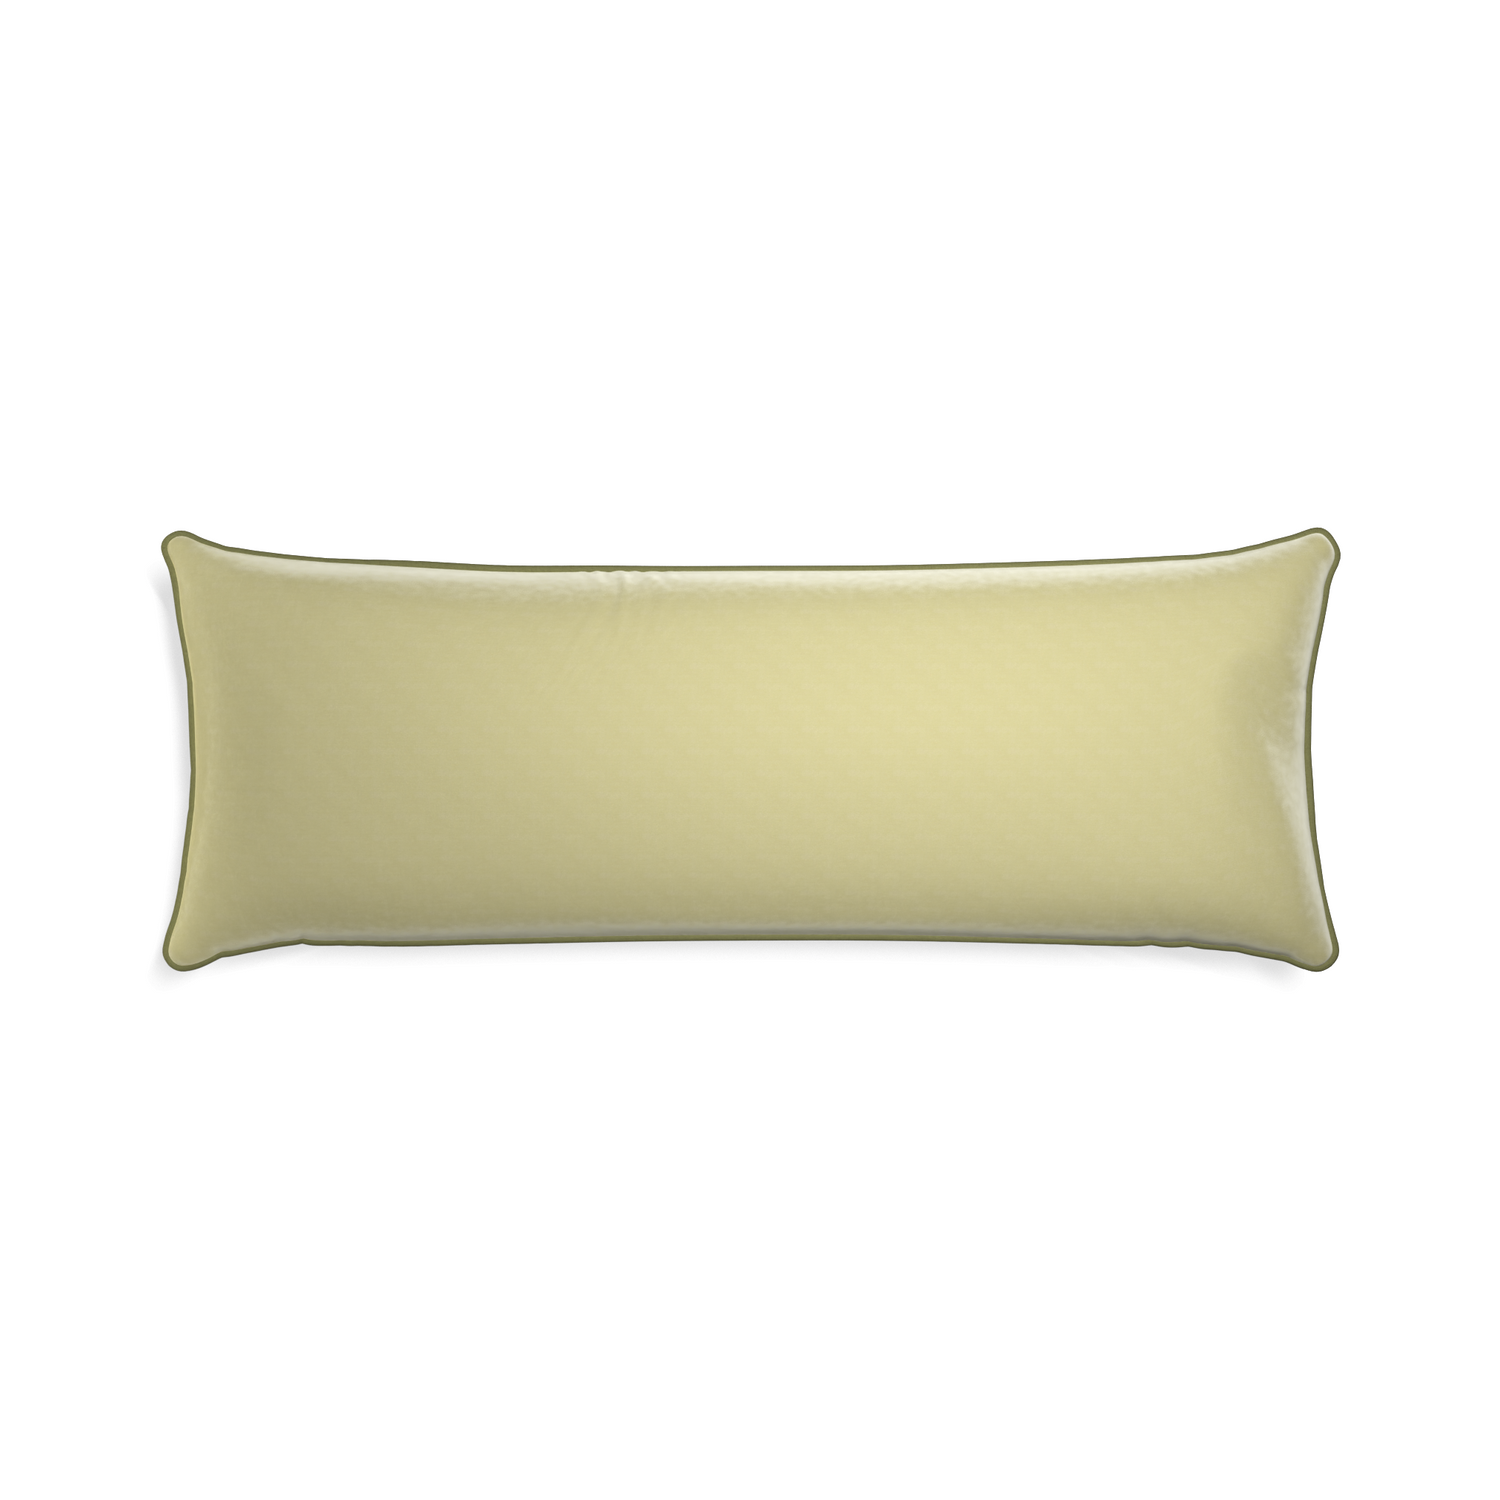 Xl-lumbar pear velvet custom pillow with moss piping on white background